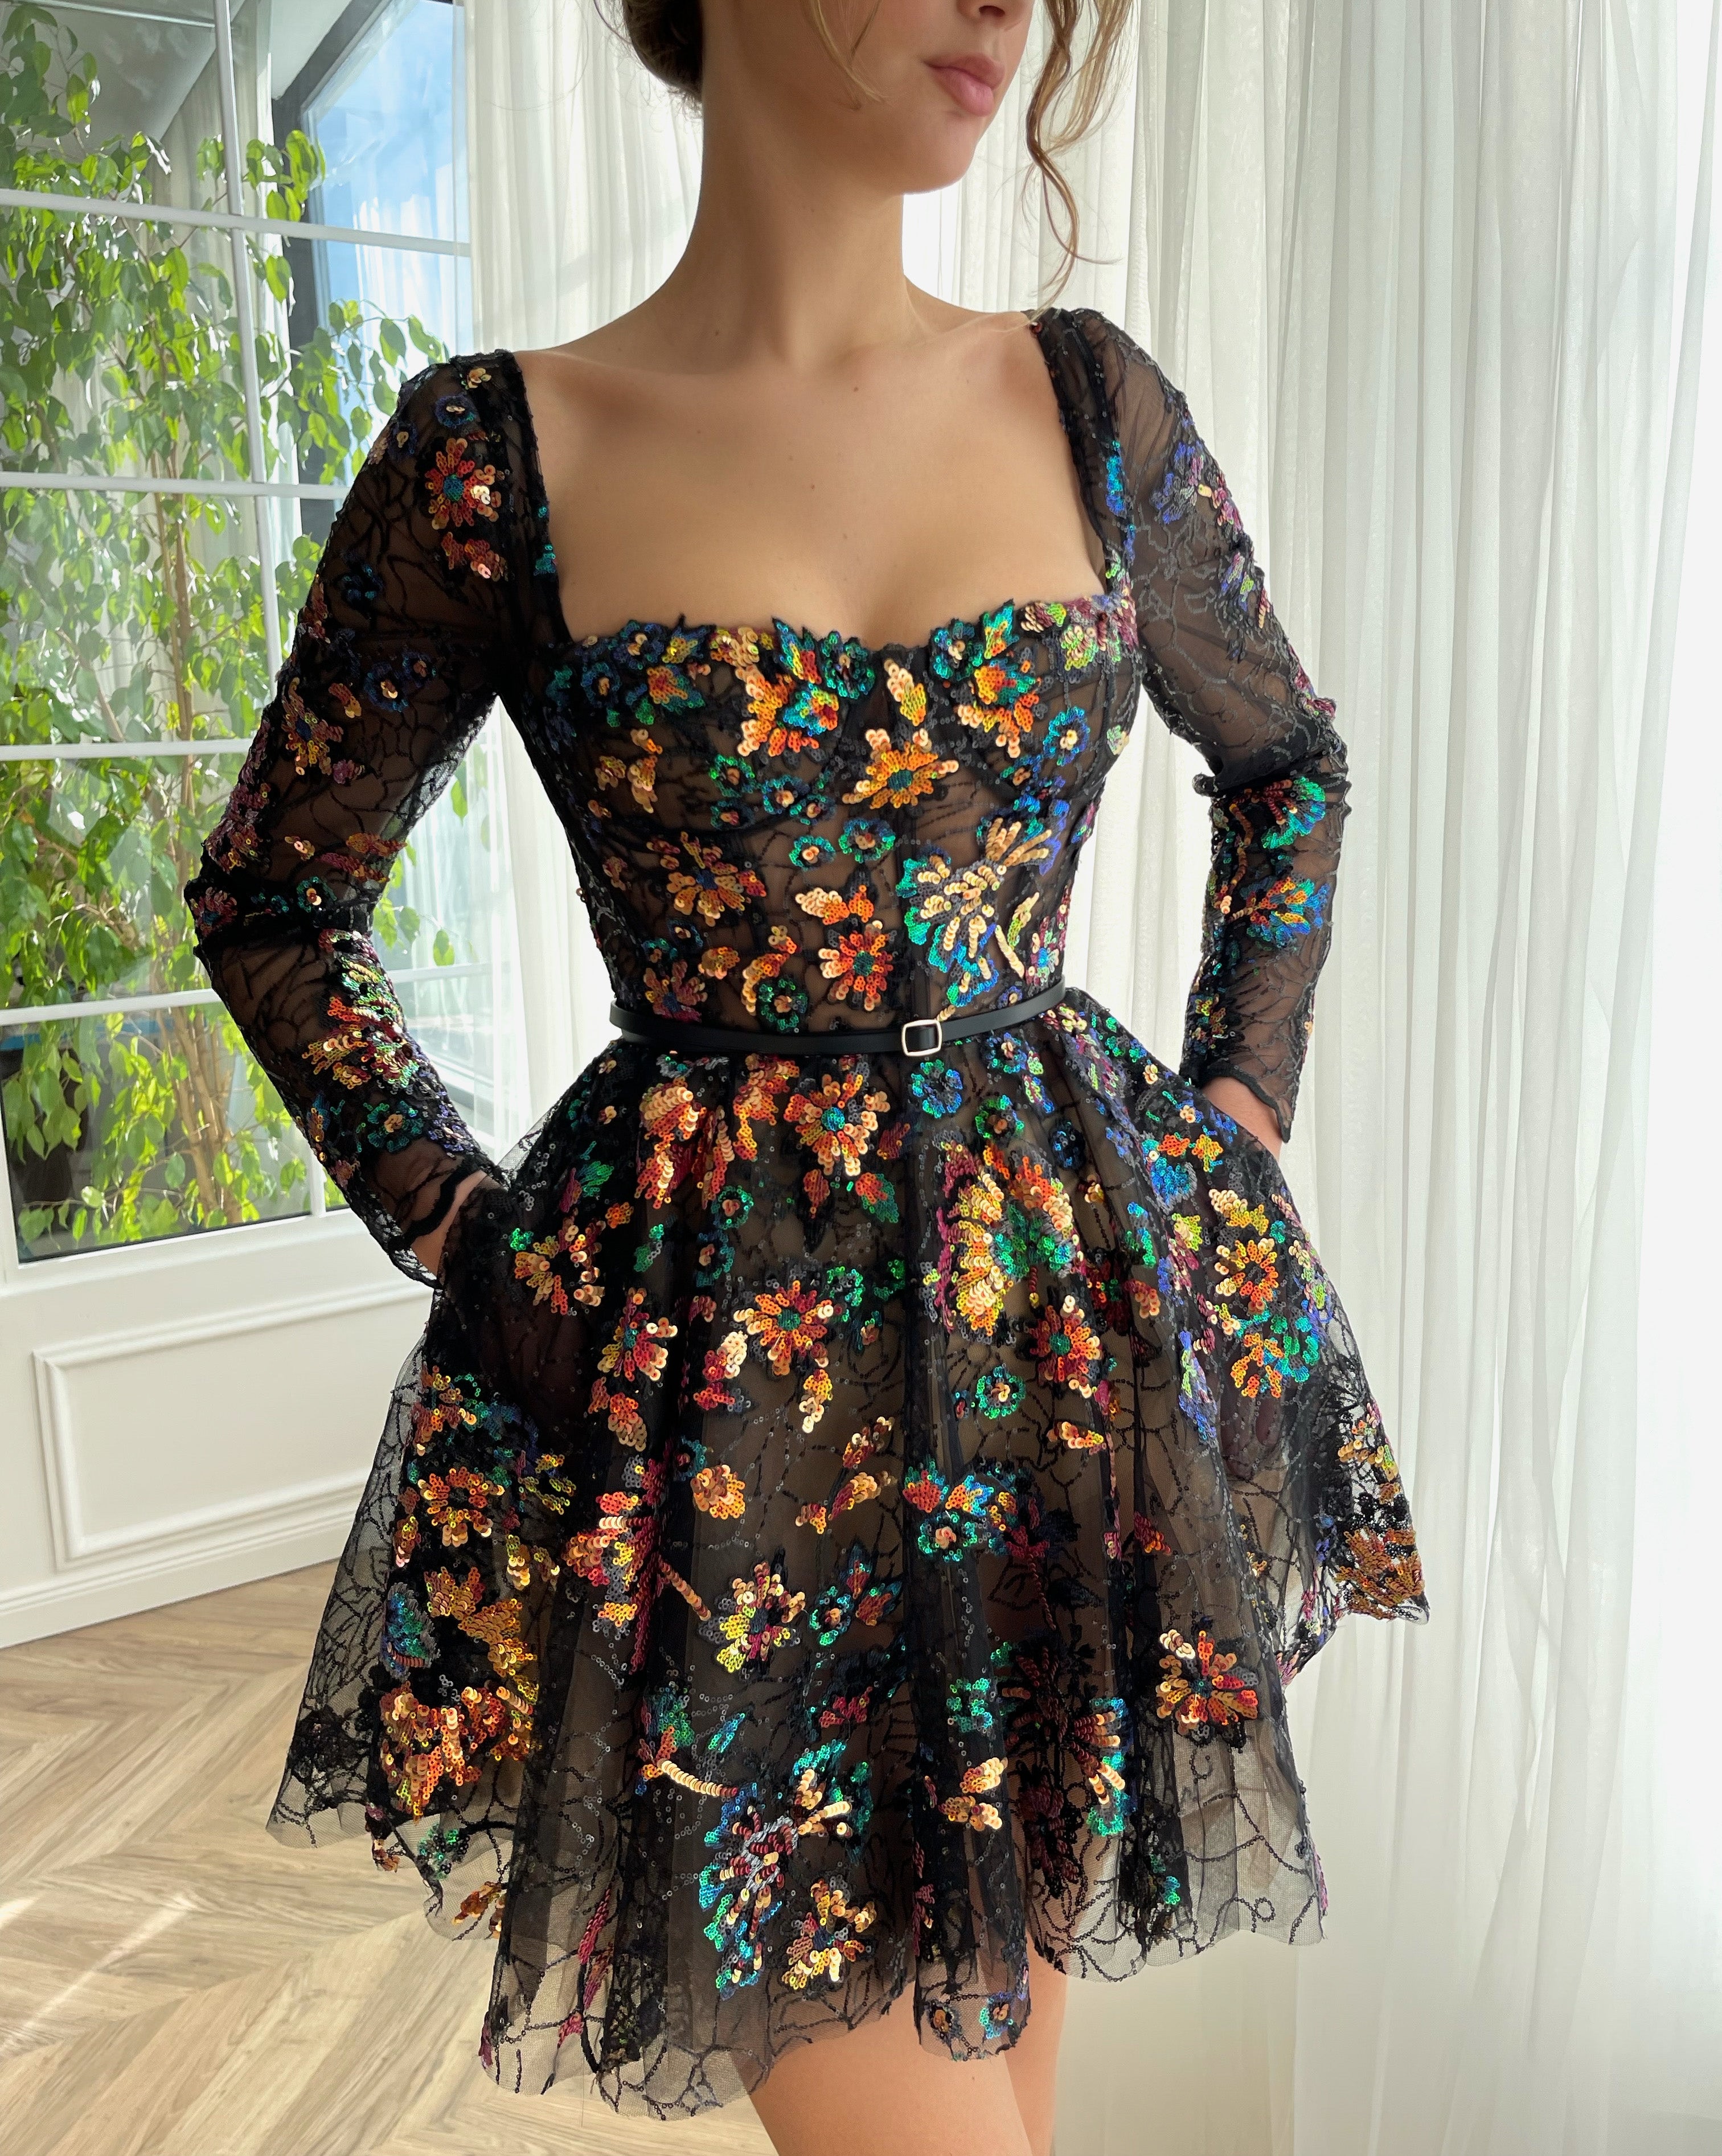 Black mini dress with flowers, embroidery, belt and long sleeves